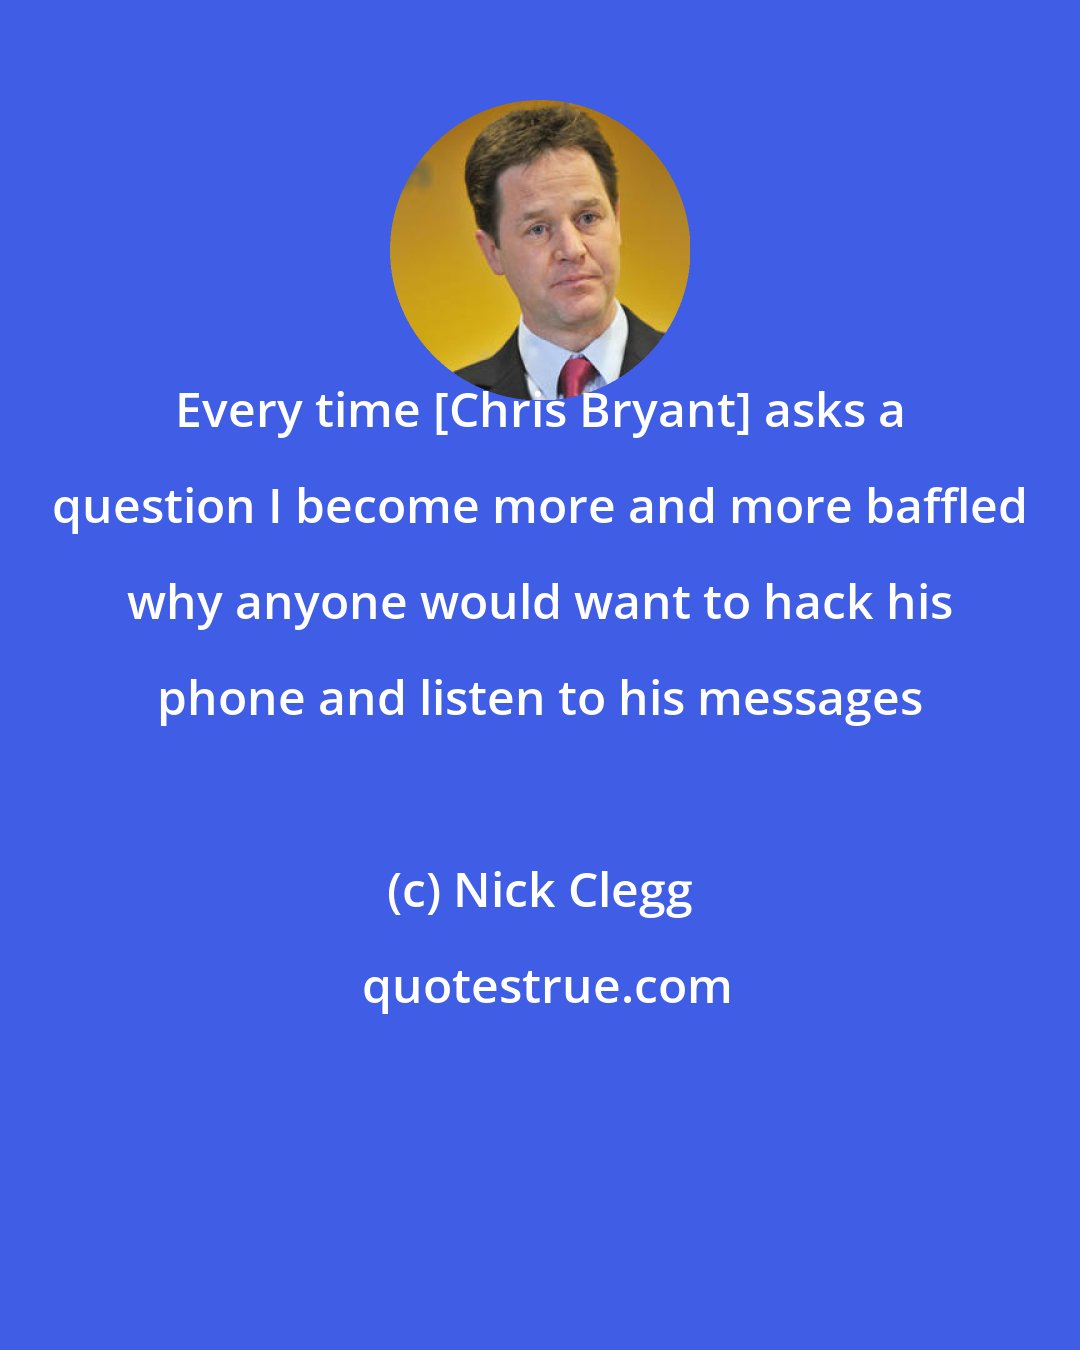 Nick Clegg: Every time [Chris Bryant] asks a question I become more and more baffled why anyone would want to hack his phone and listen to his messages